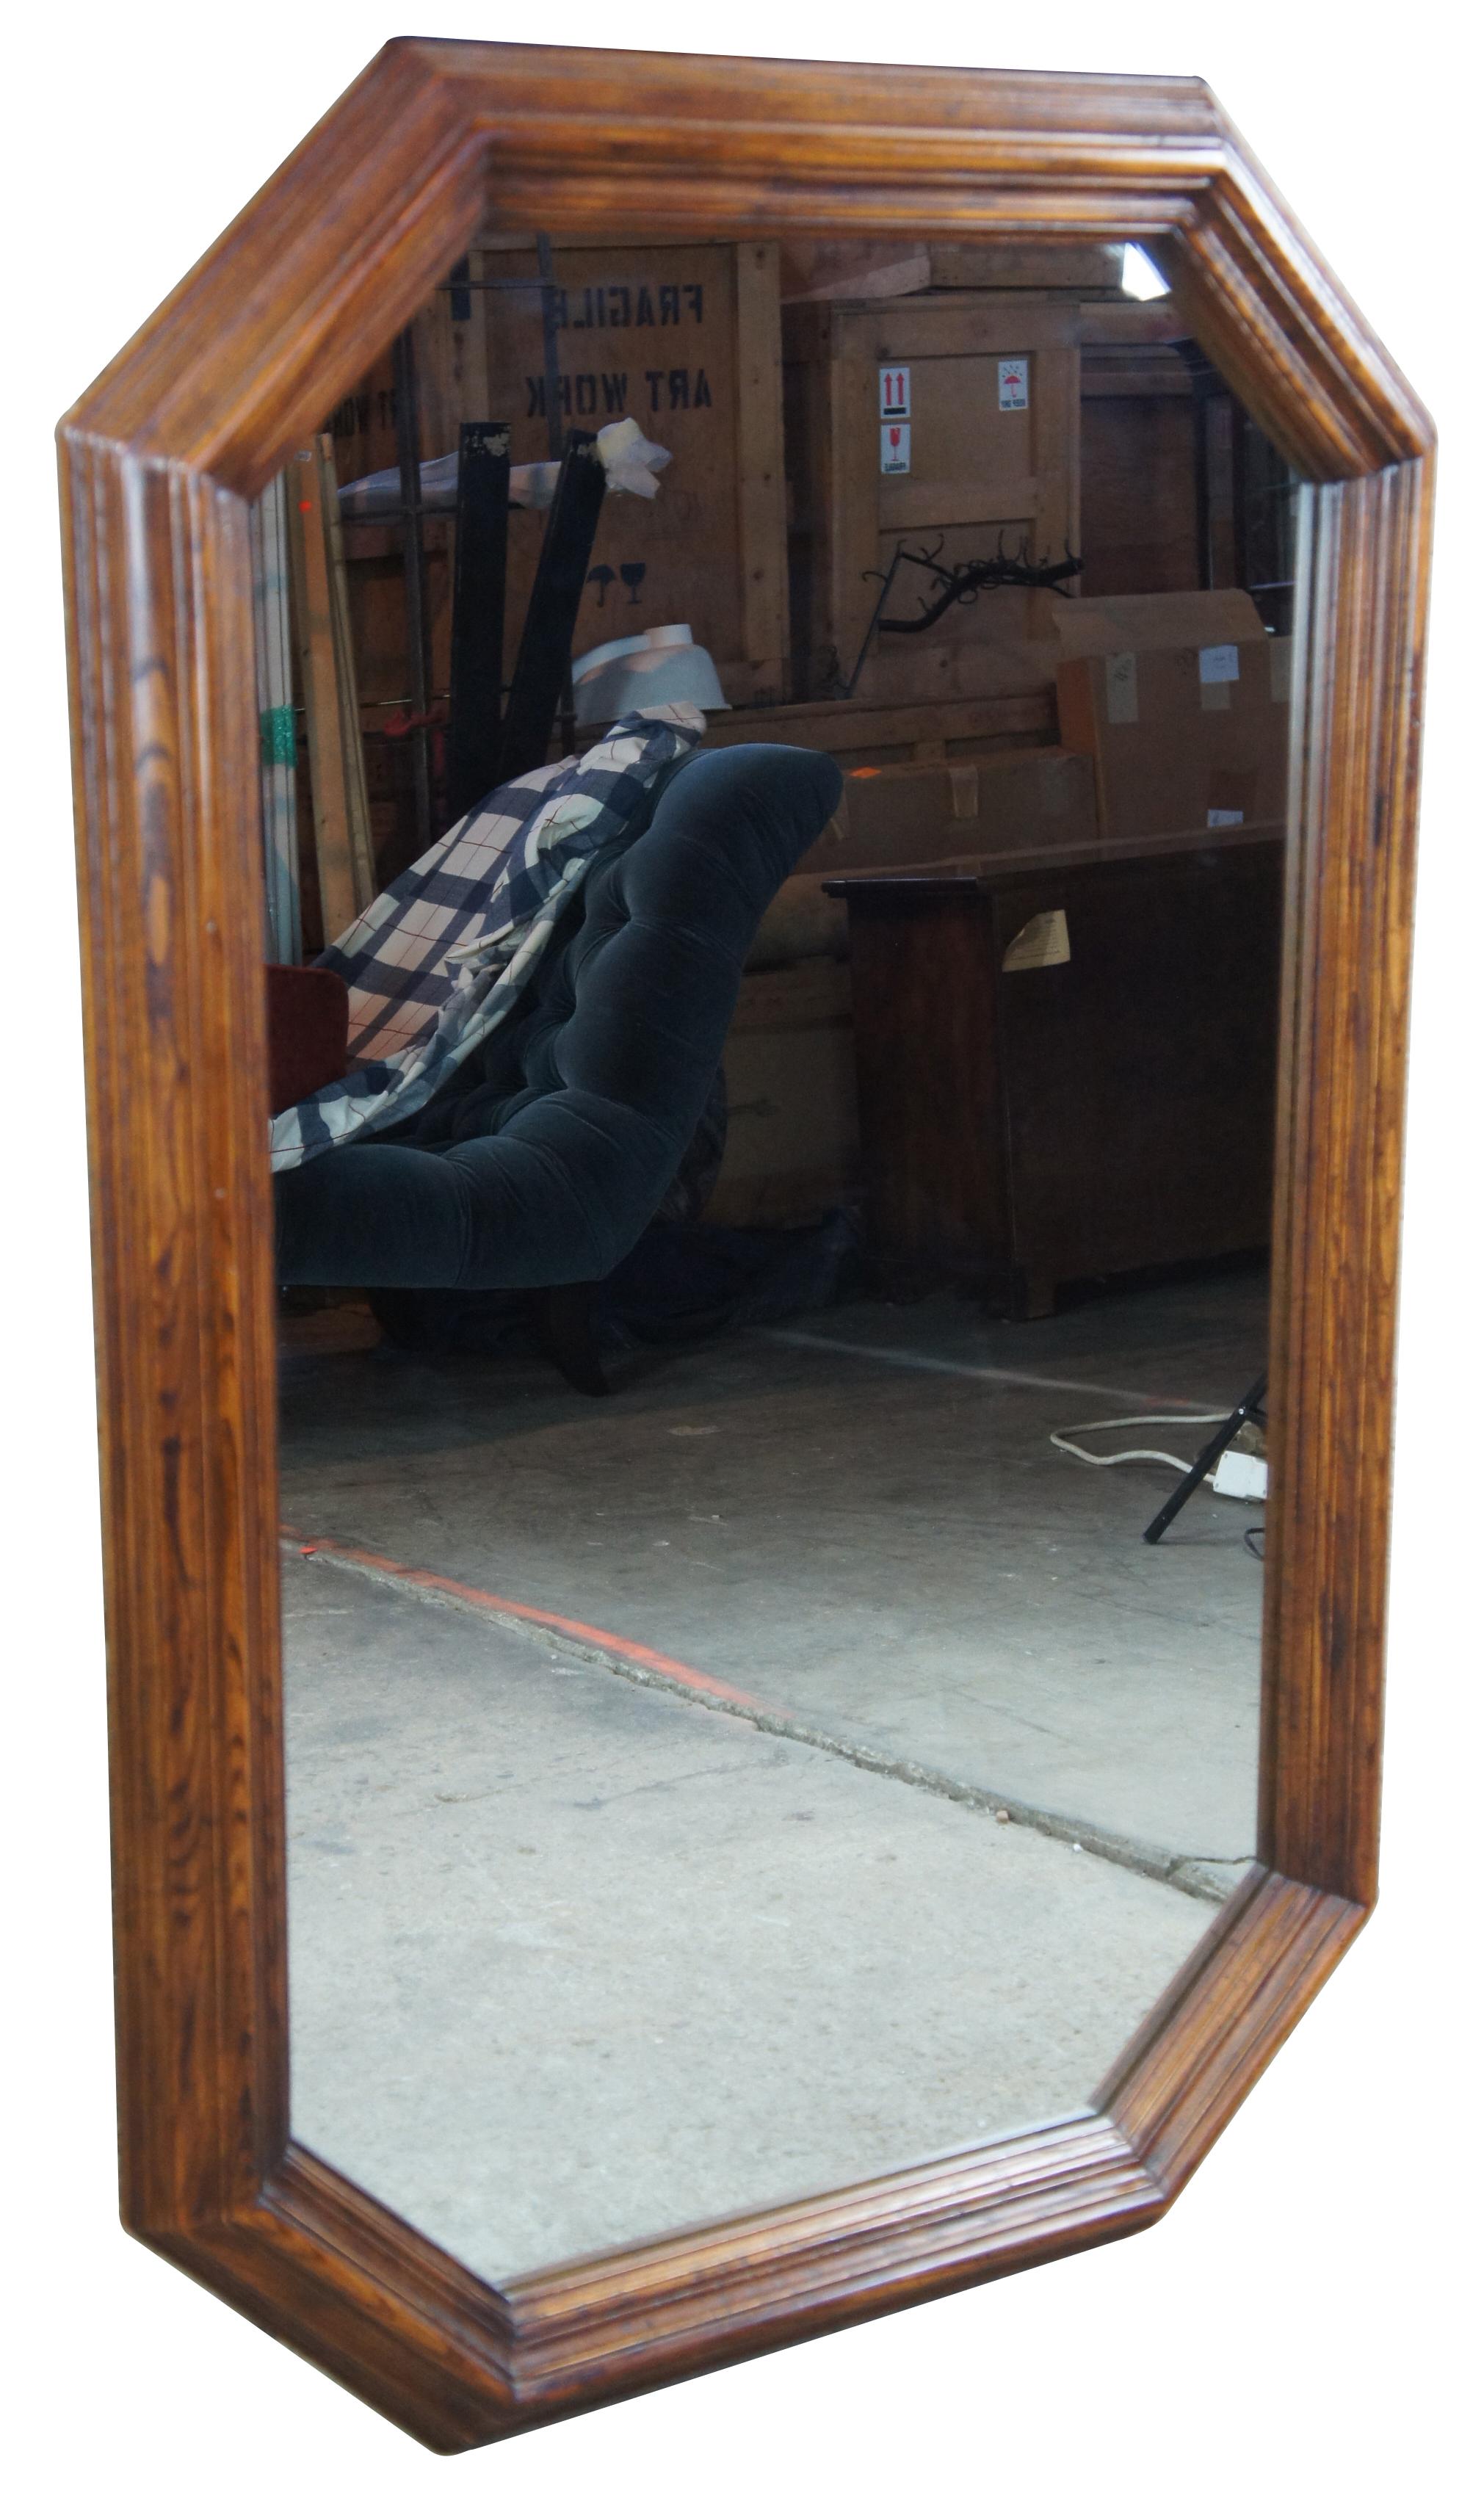 1979 Henredon folio 12 octagon shaped mirror. Made from oak with traditional styling. Measures: 48